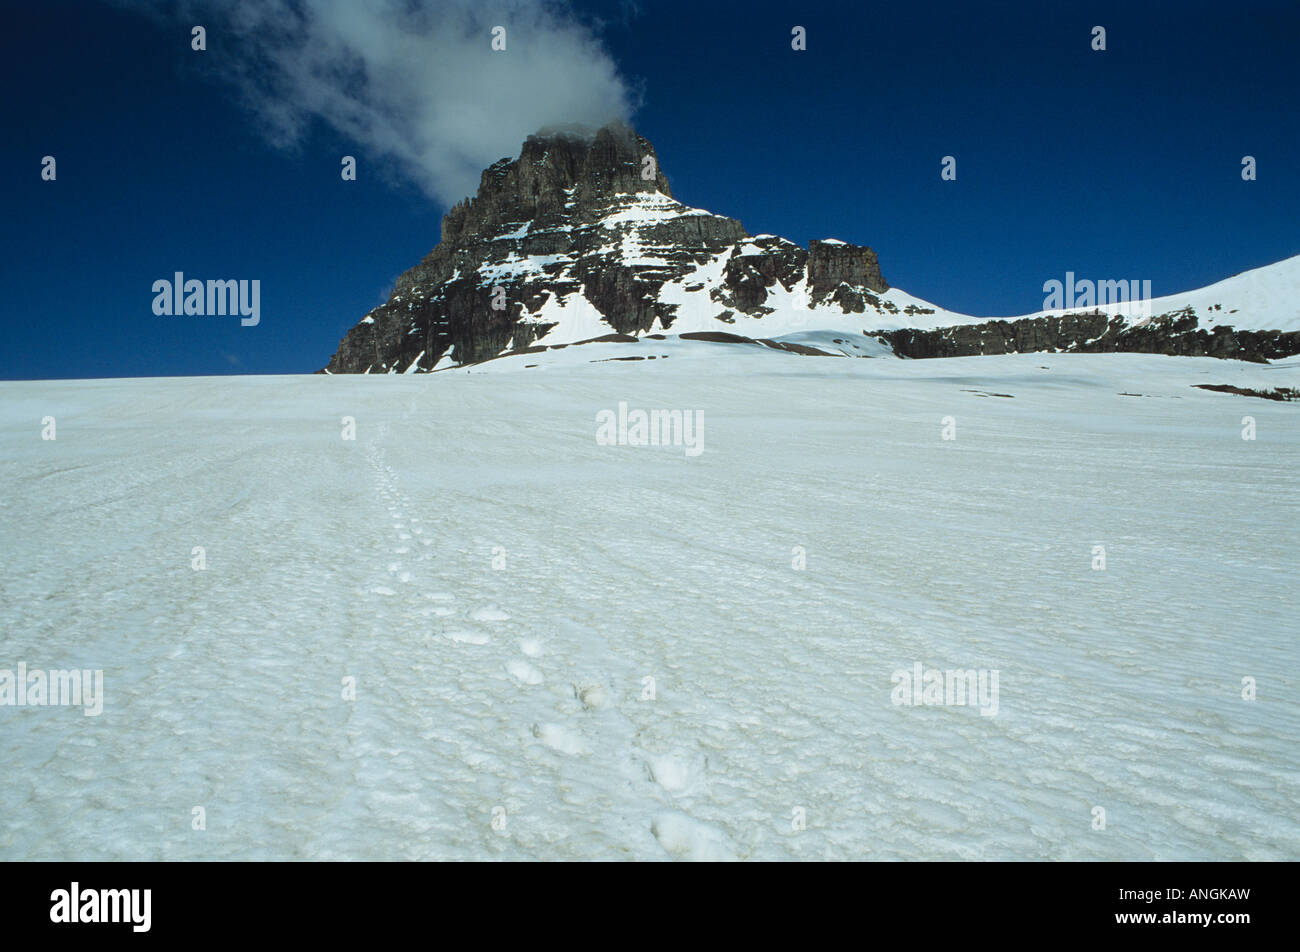 Mt. Clements and snowfield in early spring, Logan Pass, Glacier National Park, Montana  USA Stock Photo